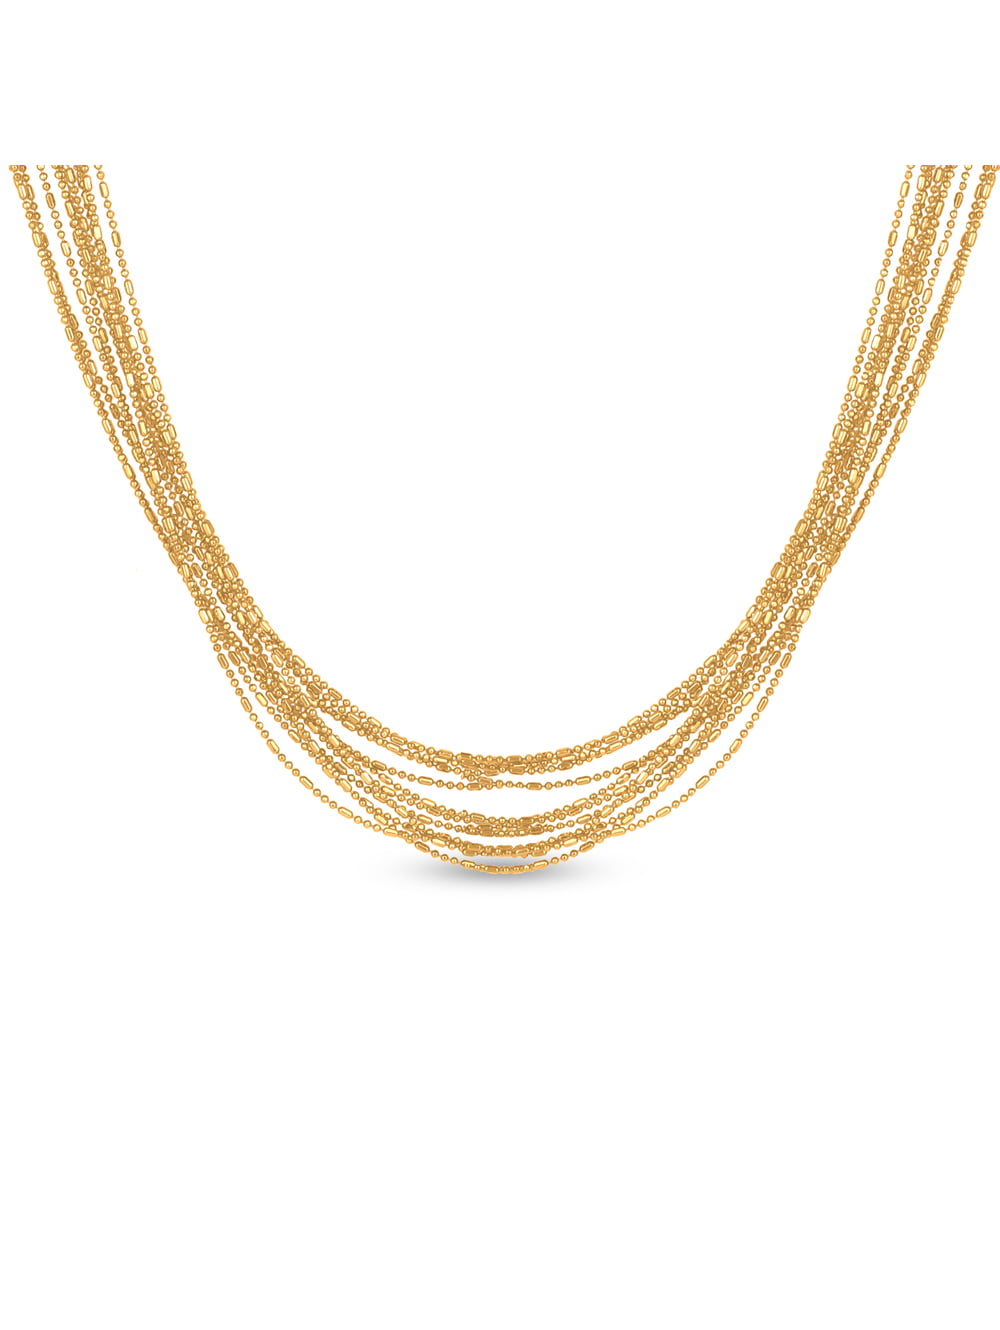 Designs by Helen Andrews 18k Gold Over Sterling Silver Open Link with Diamond Cut Chain